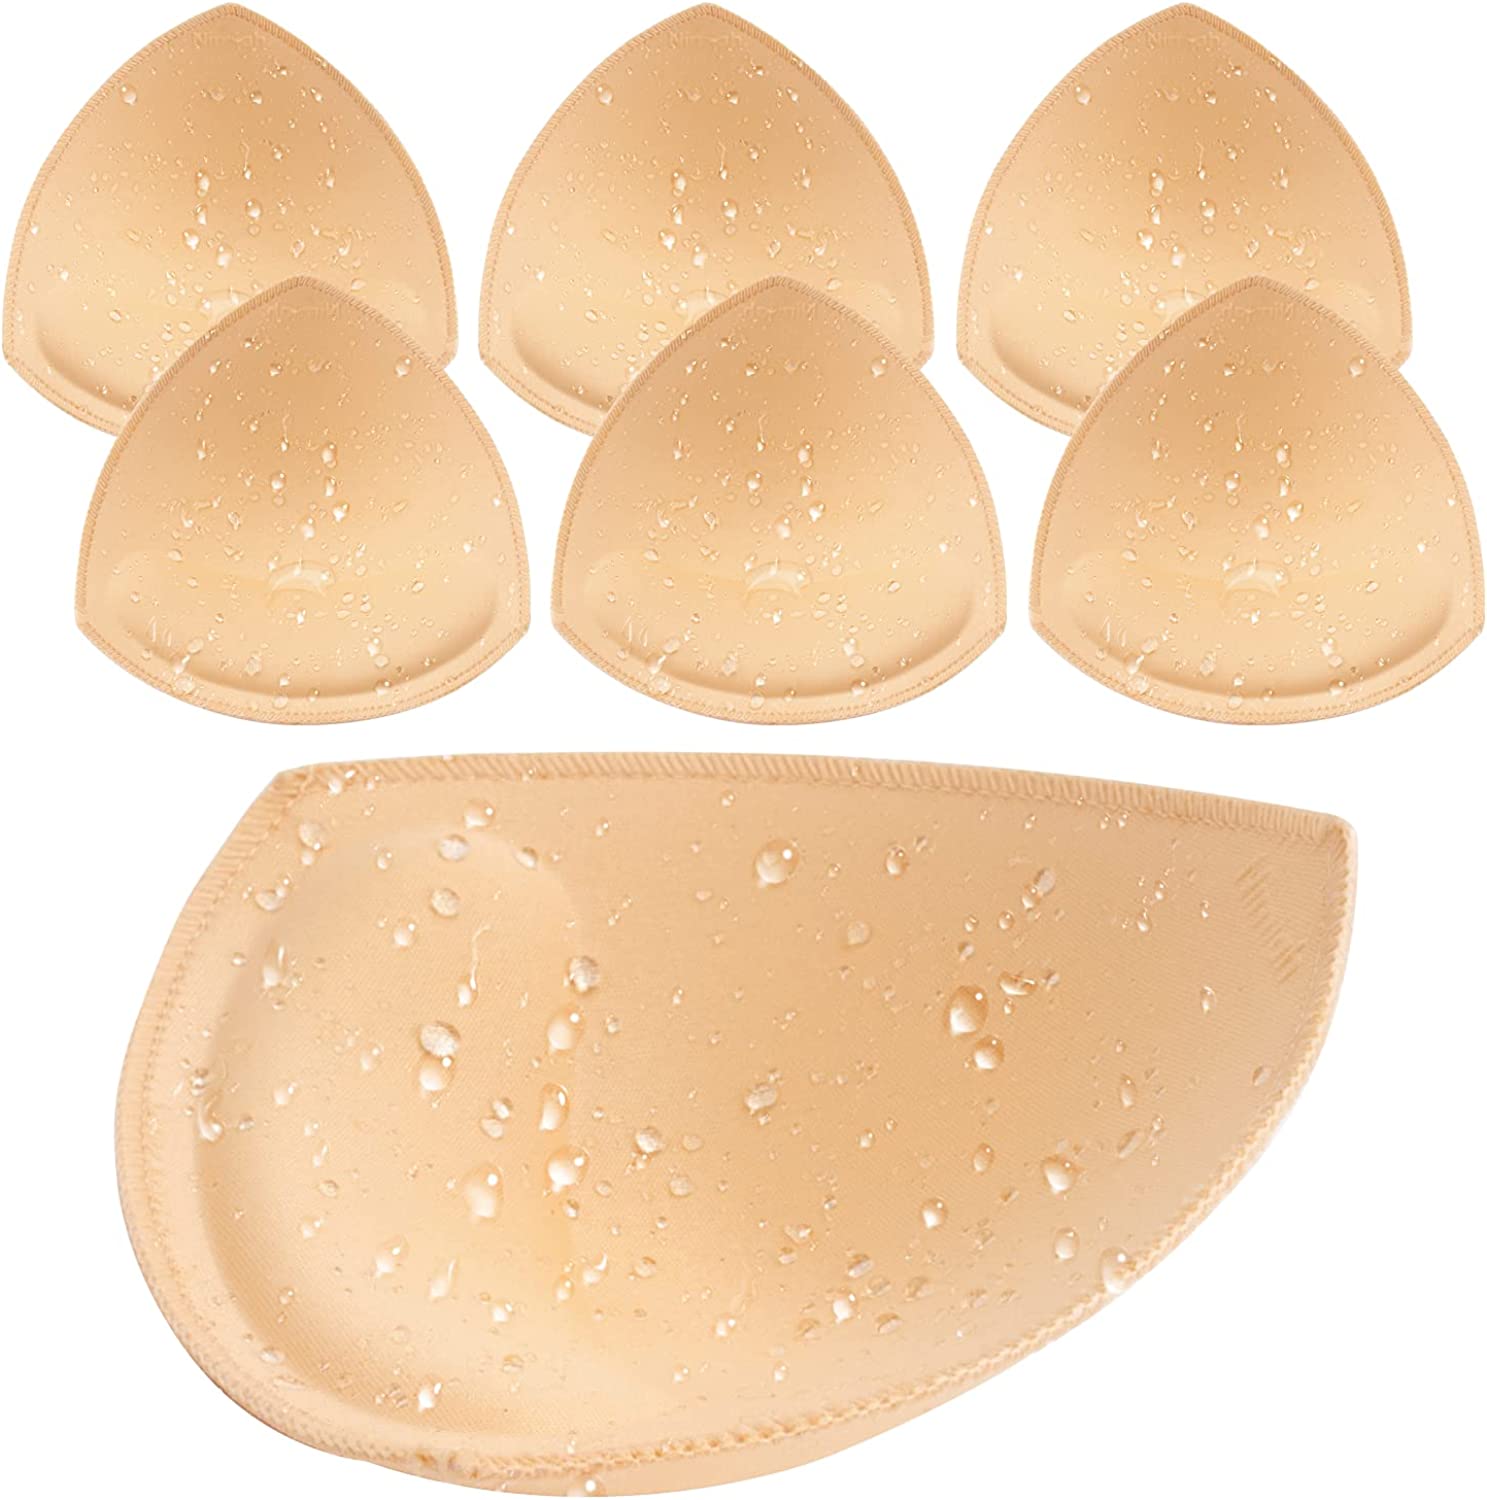 KSang Bra Pads Inserts 4 Pairs Sewn Edges Breast Padding for Sports Bras  Swimsuits Bikini A, B, C, D Cup Available